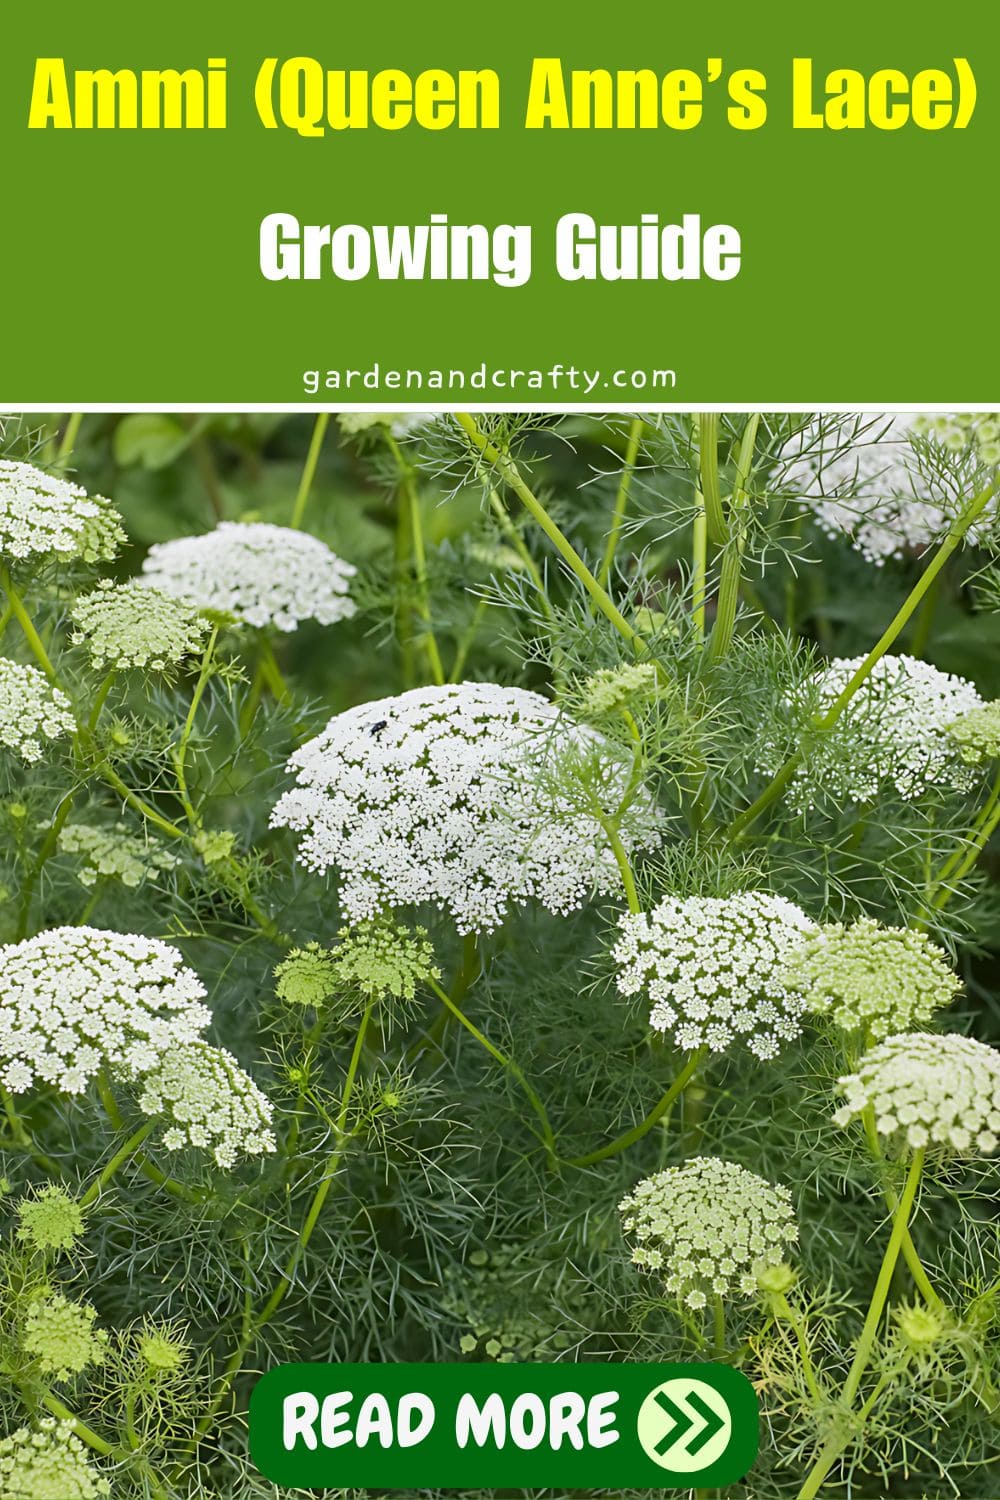 Ammi (Queen Anne’s Lace) Growing Guide